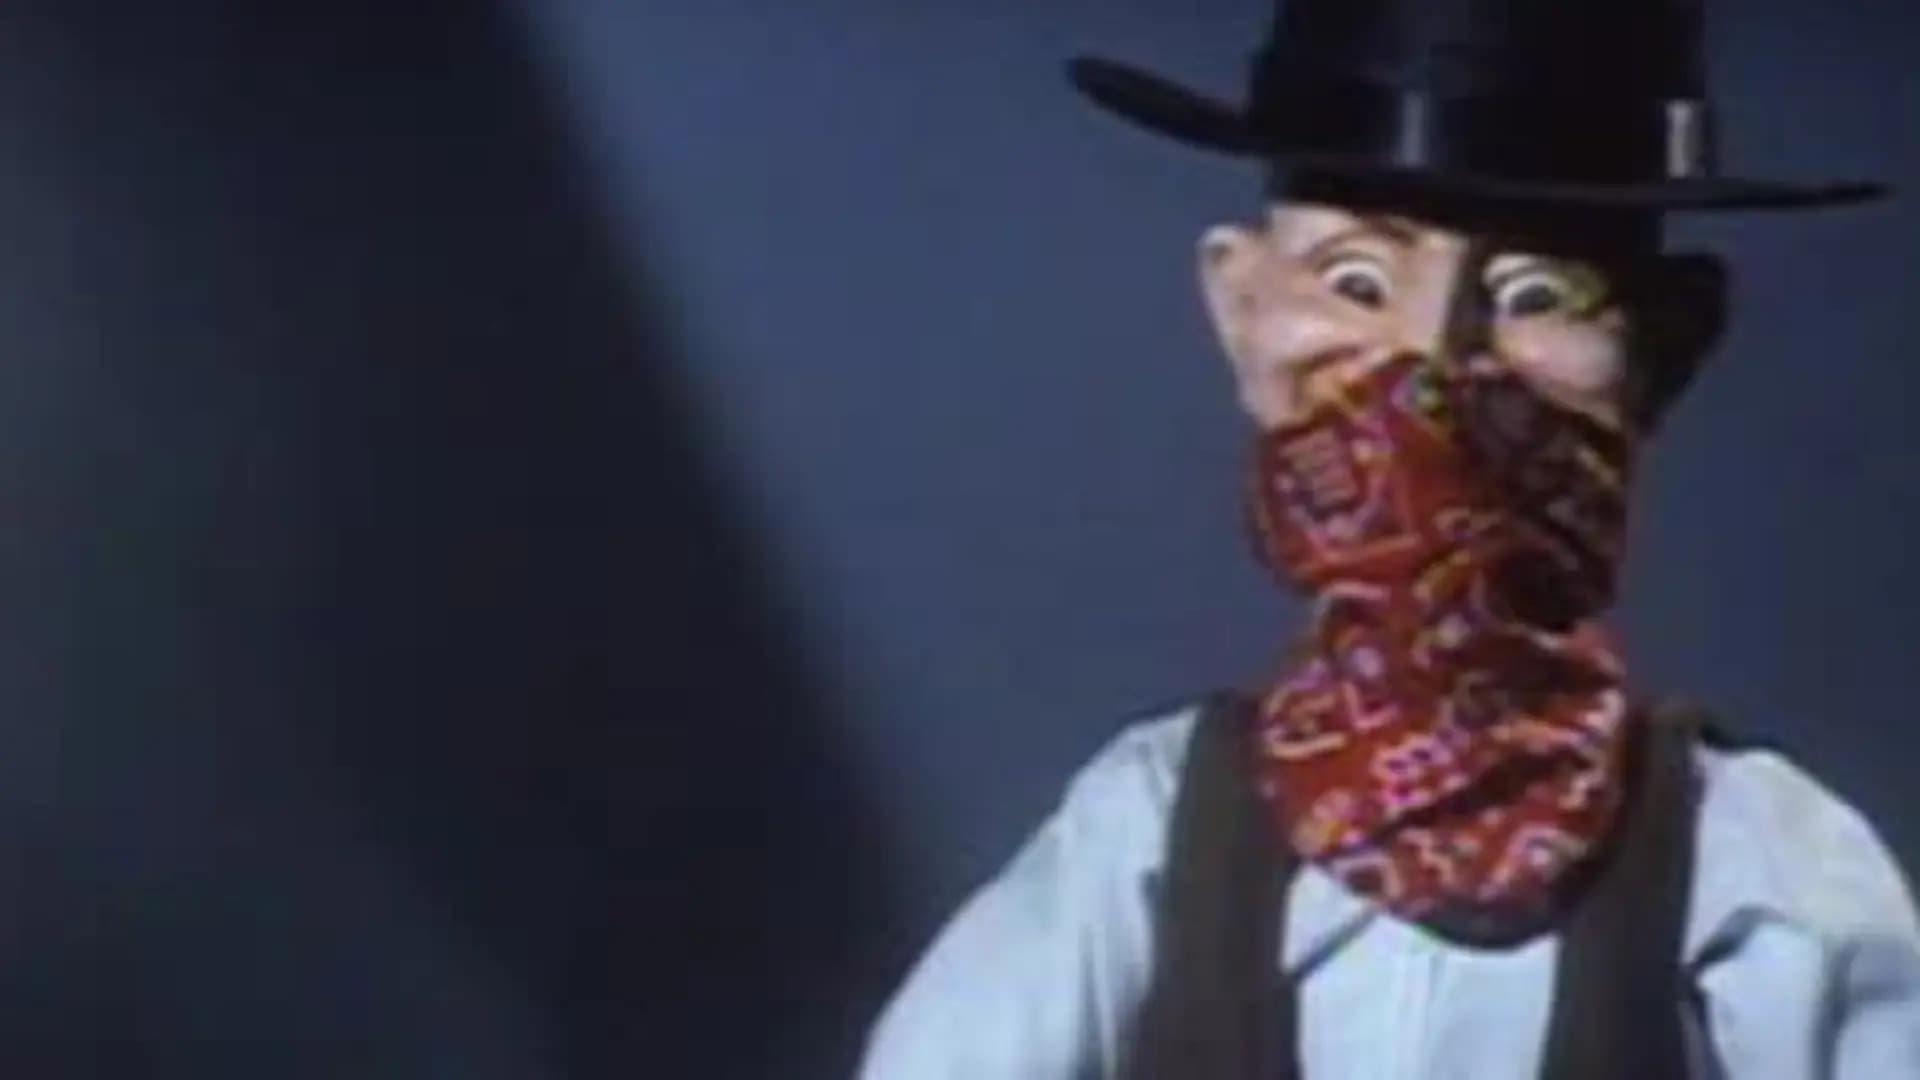 Videozone: The Making of "Puppet Master III" backdrop